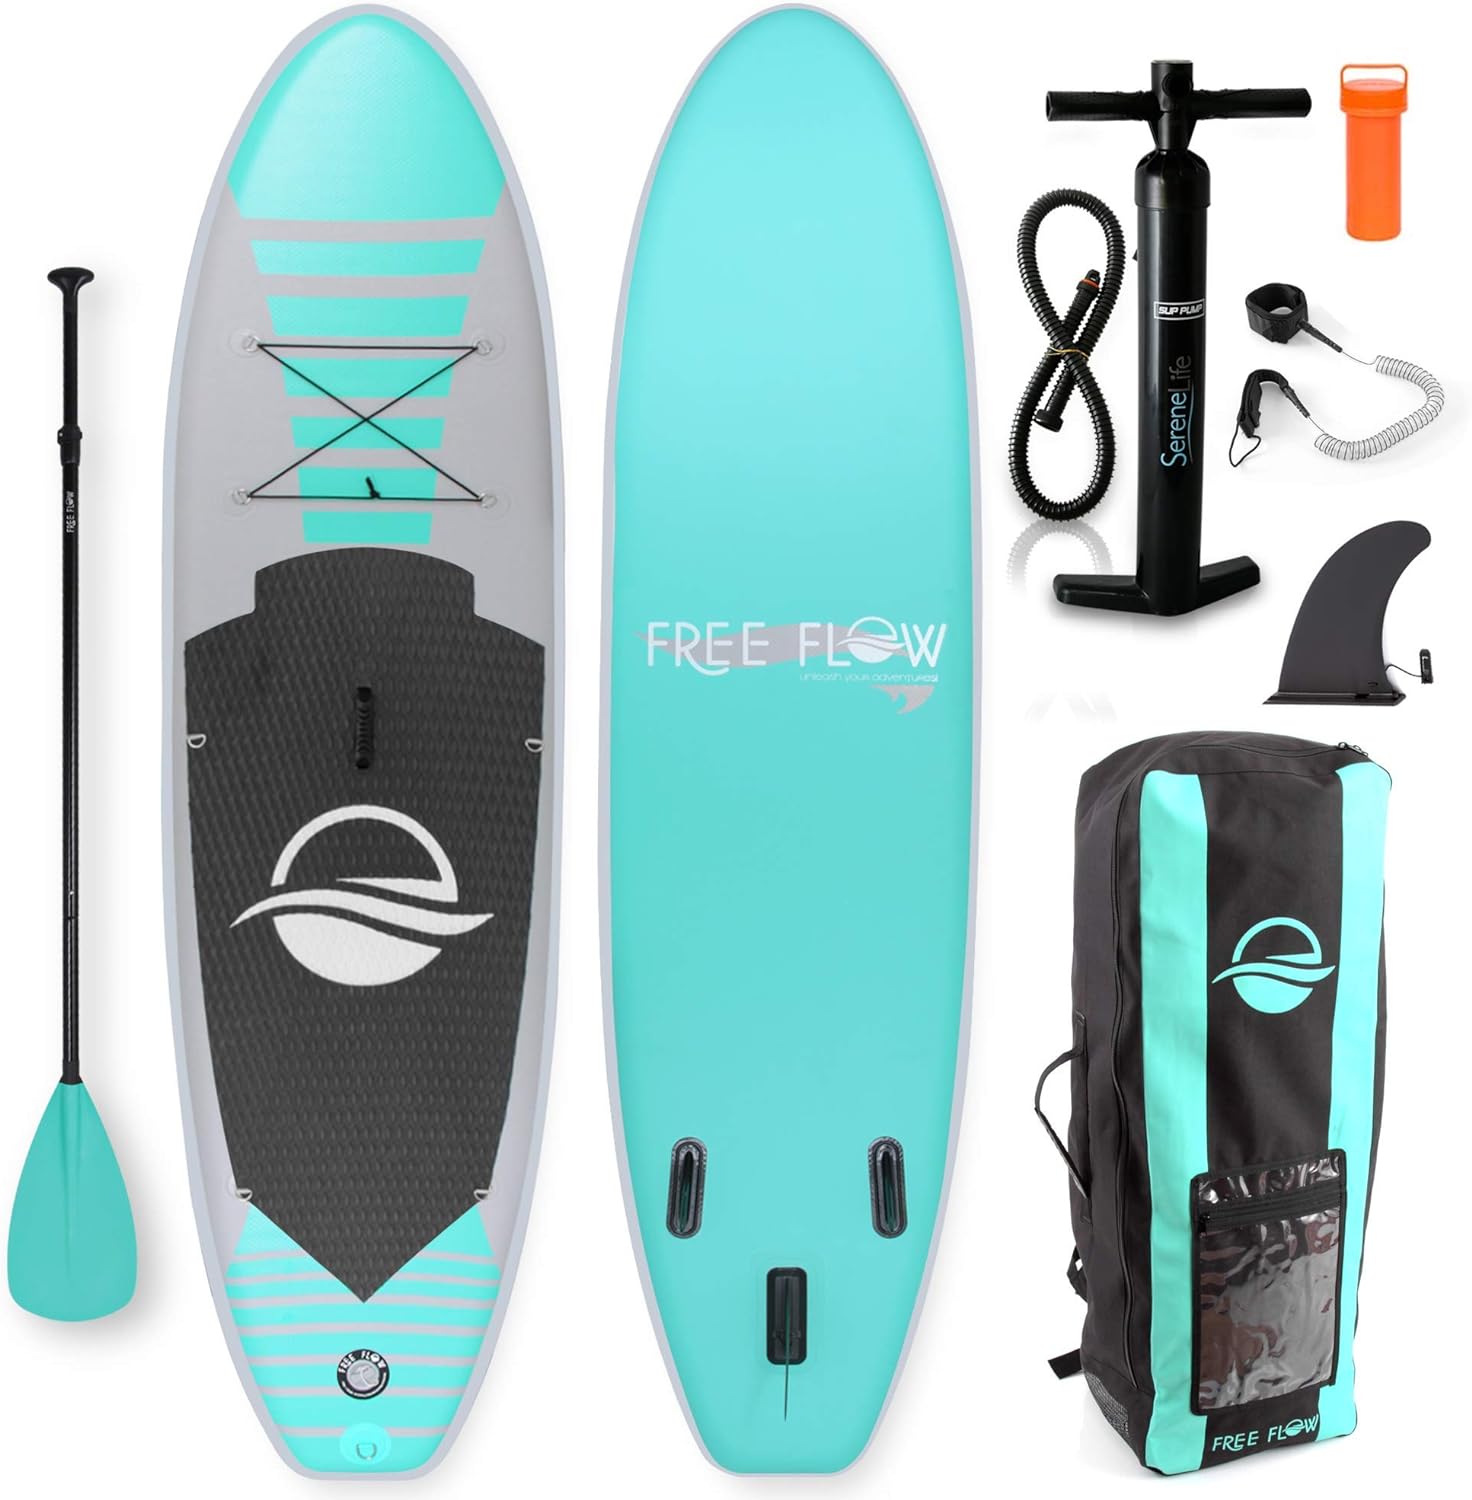 SereneLife premium stand up paddle board